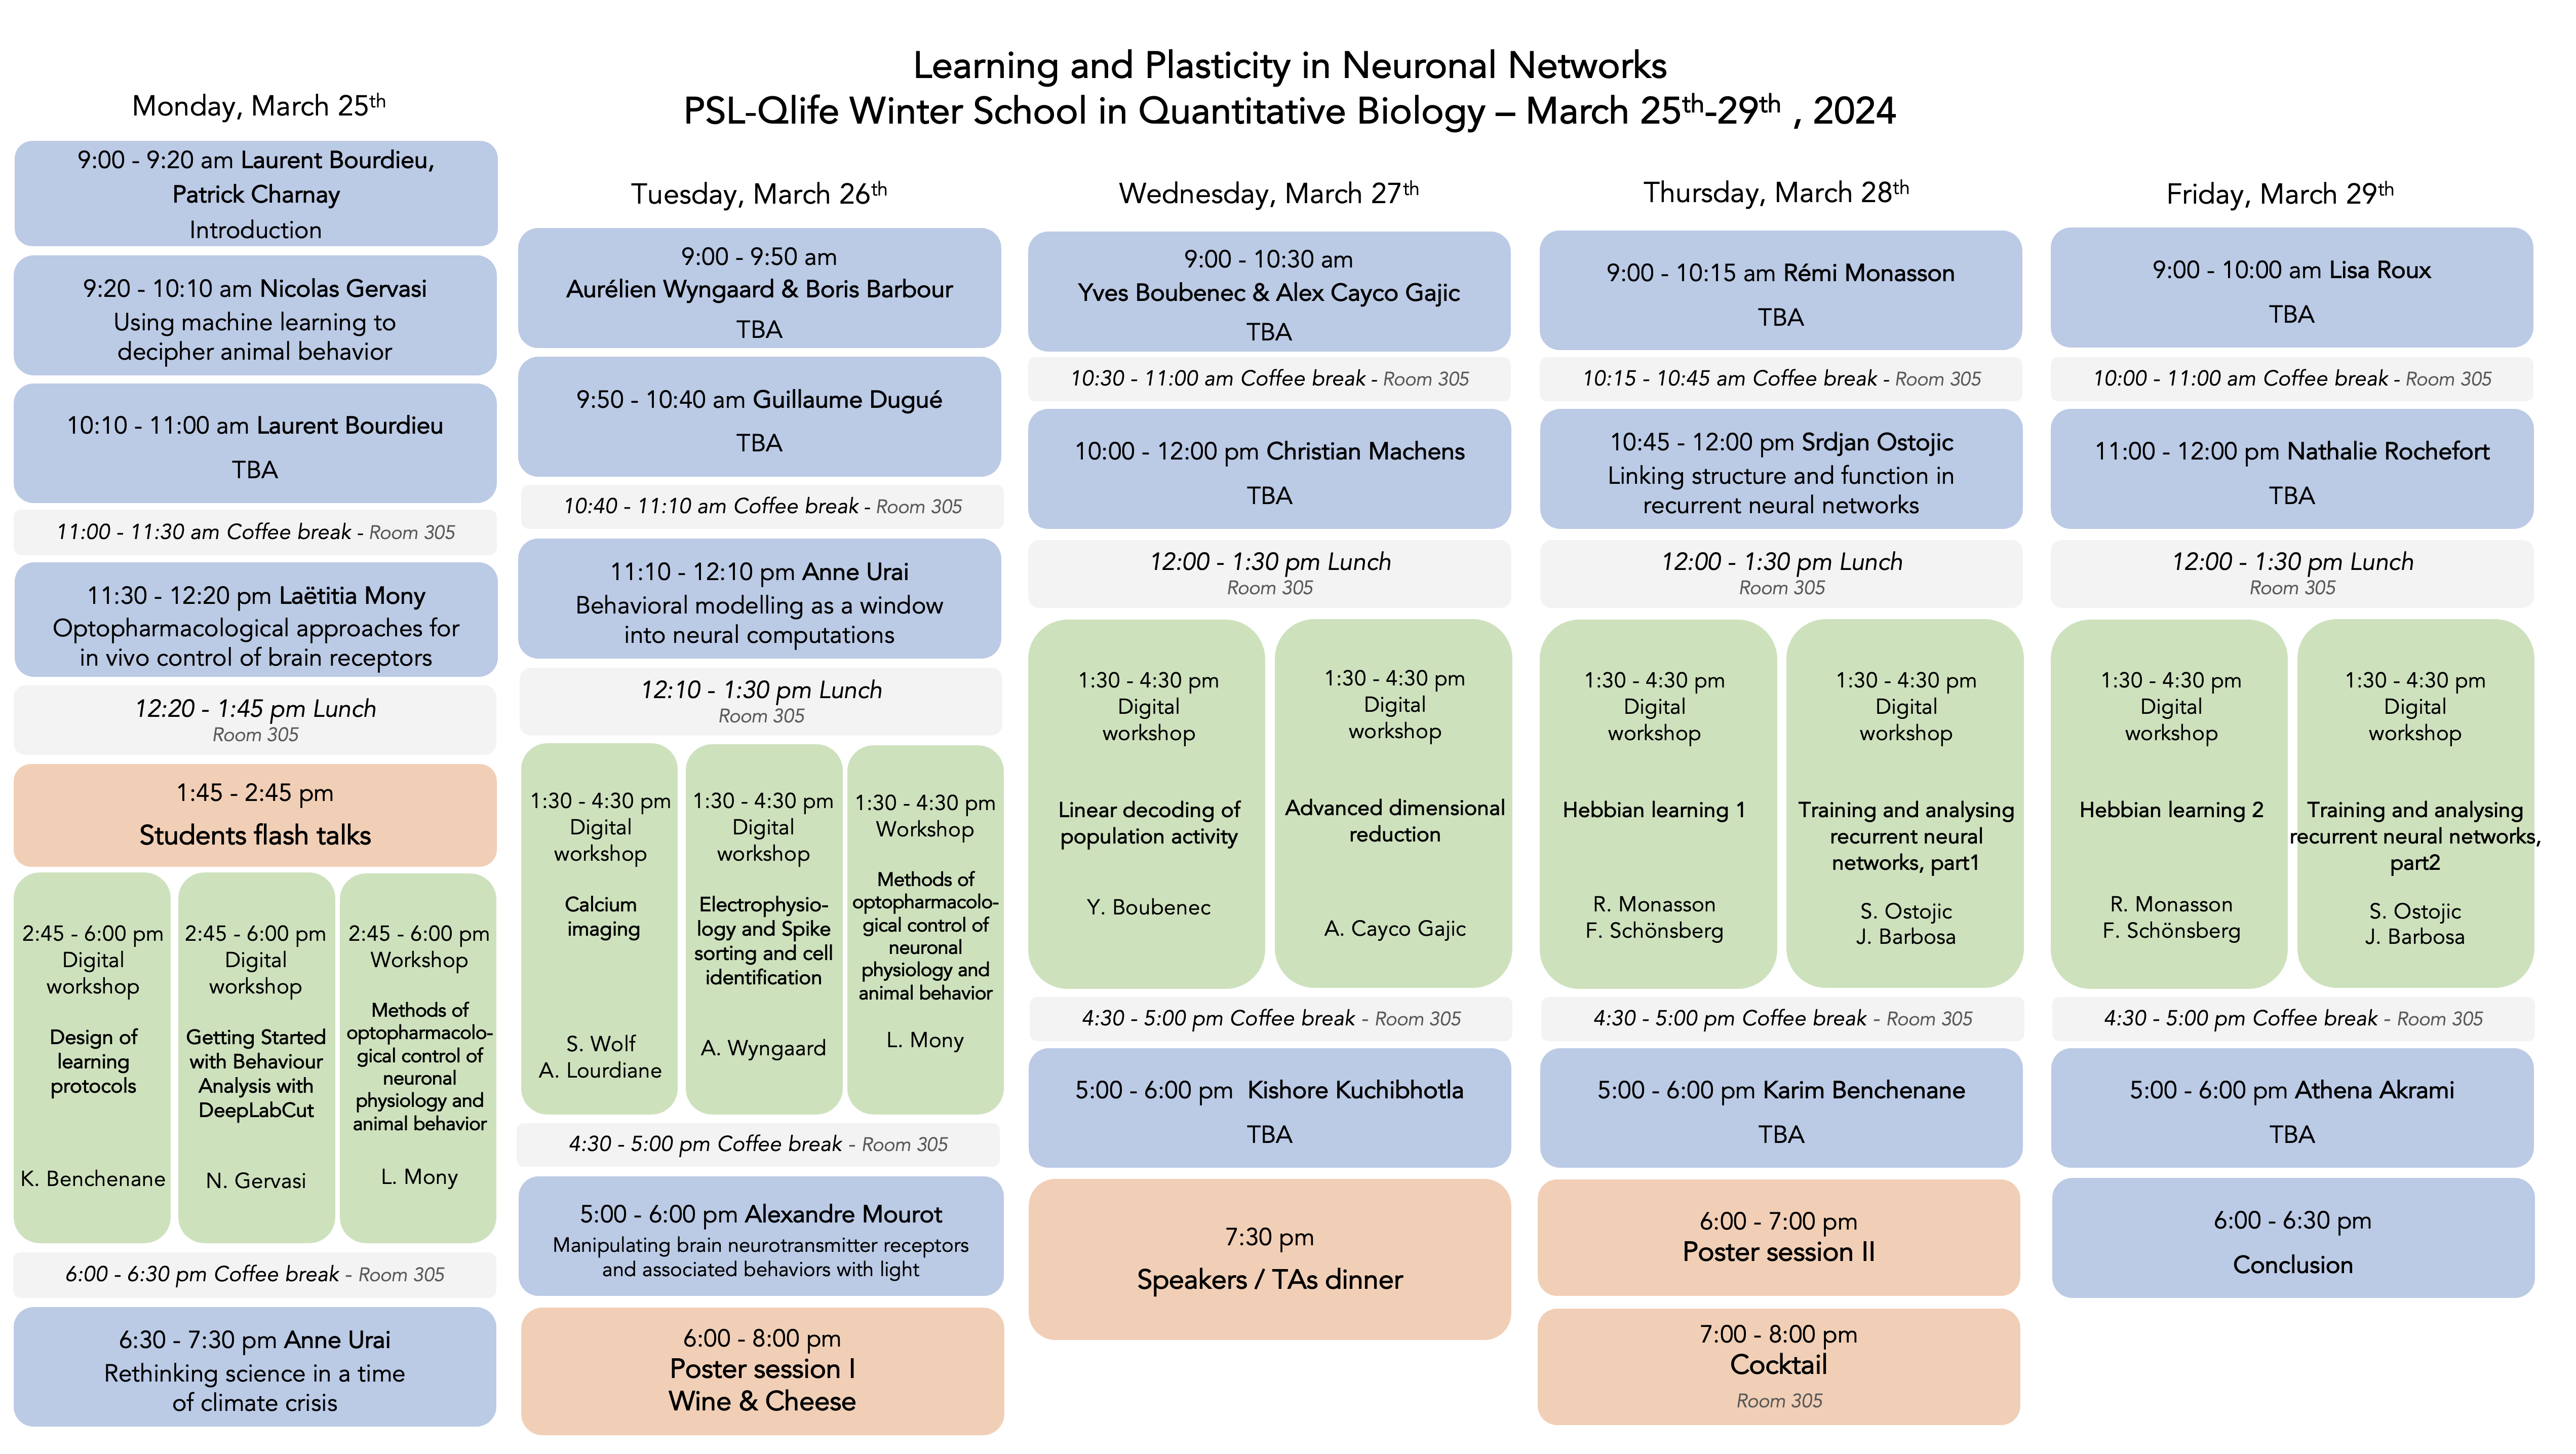 Program "Learning and Plasticity in Neuronal Networks"